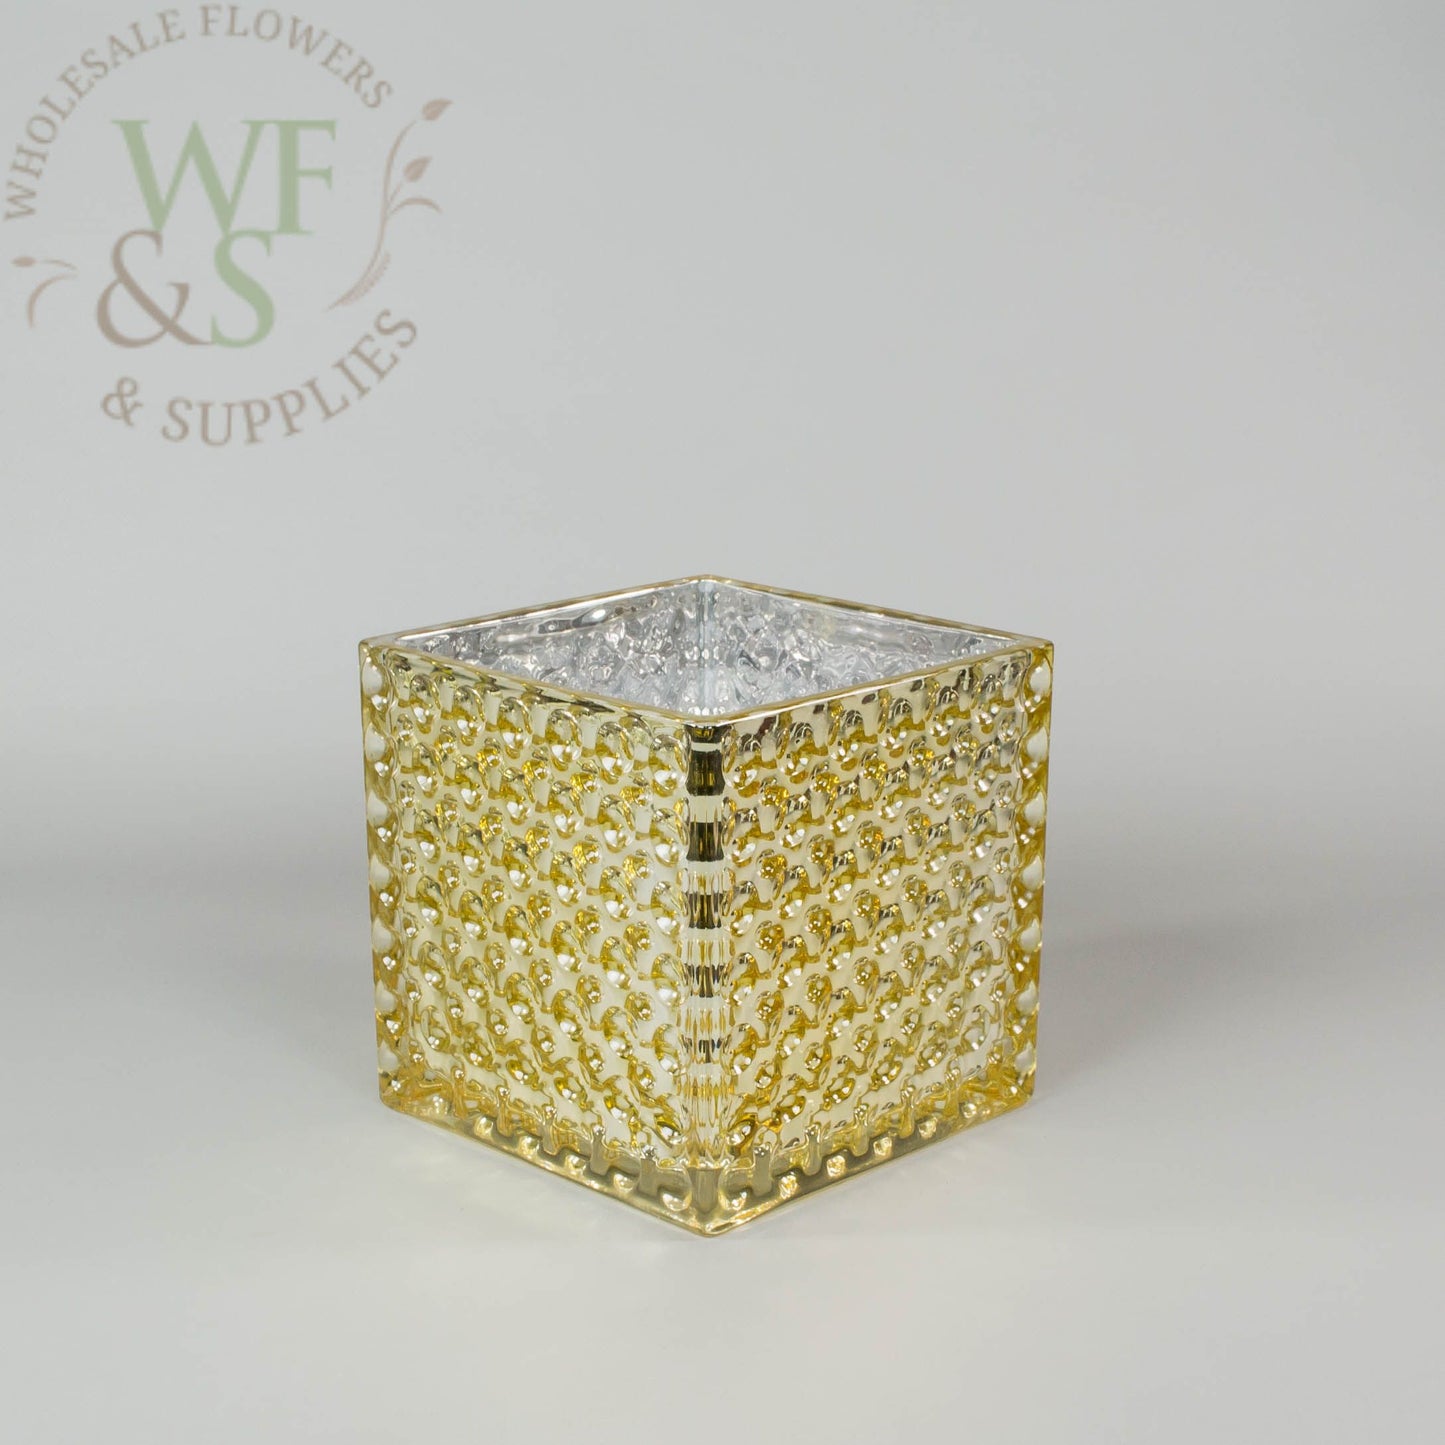 5" Gold Glass Cube Vase Dimple Effect